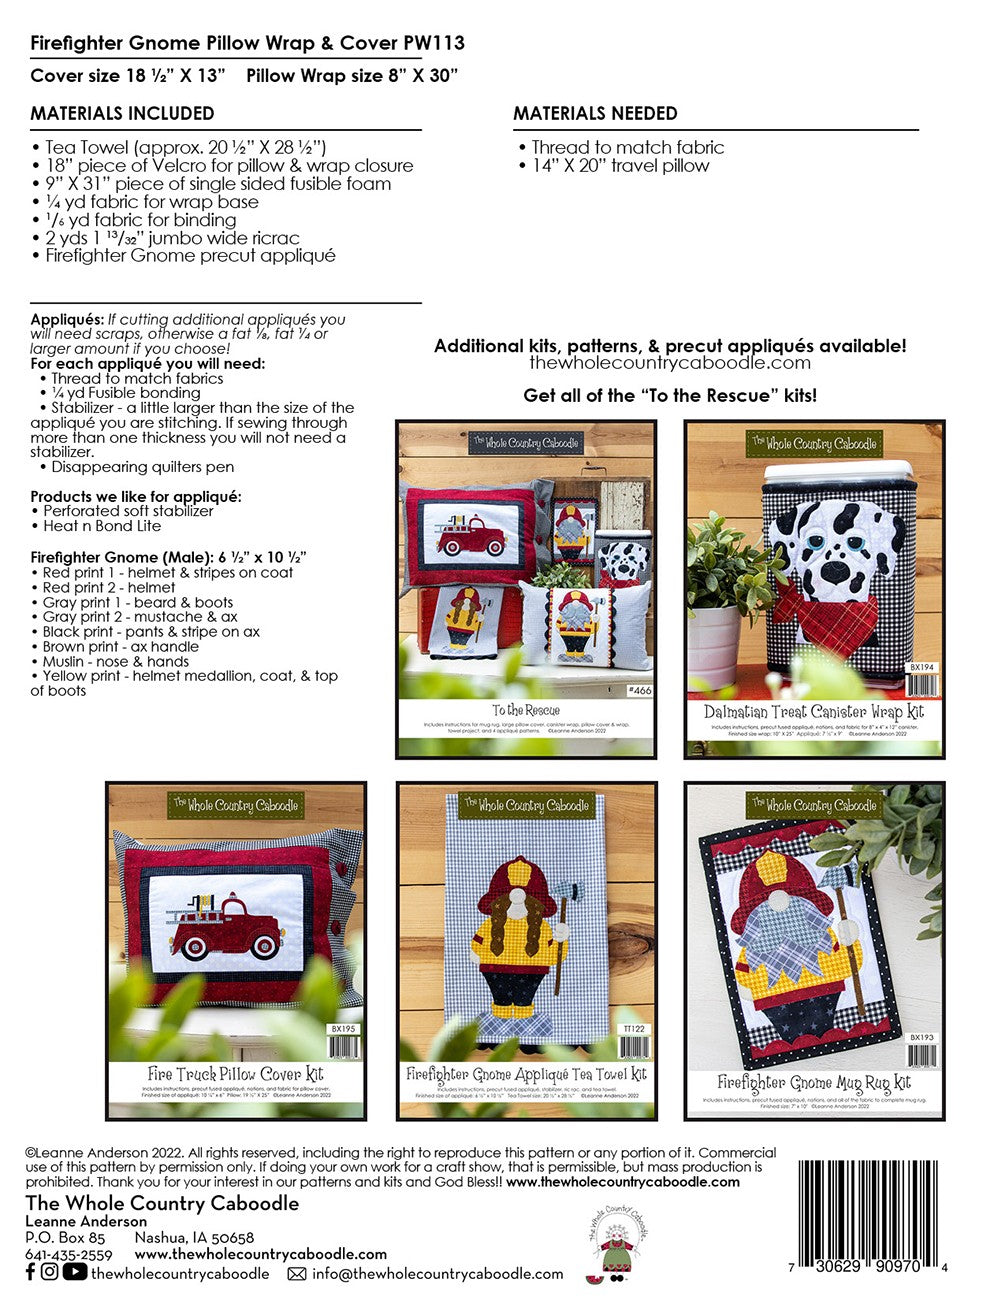 Back of the Firefighter Gnome Pillow Wrap & Cover Kit by Whole Country Caboodle